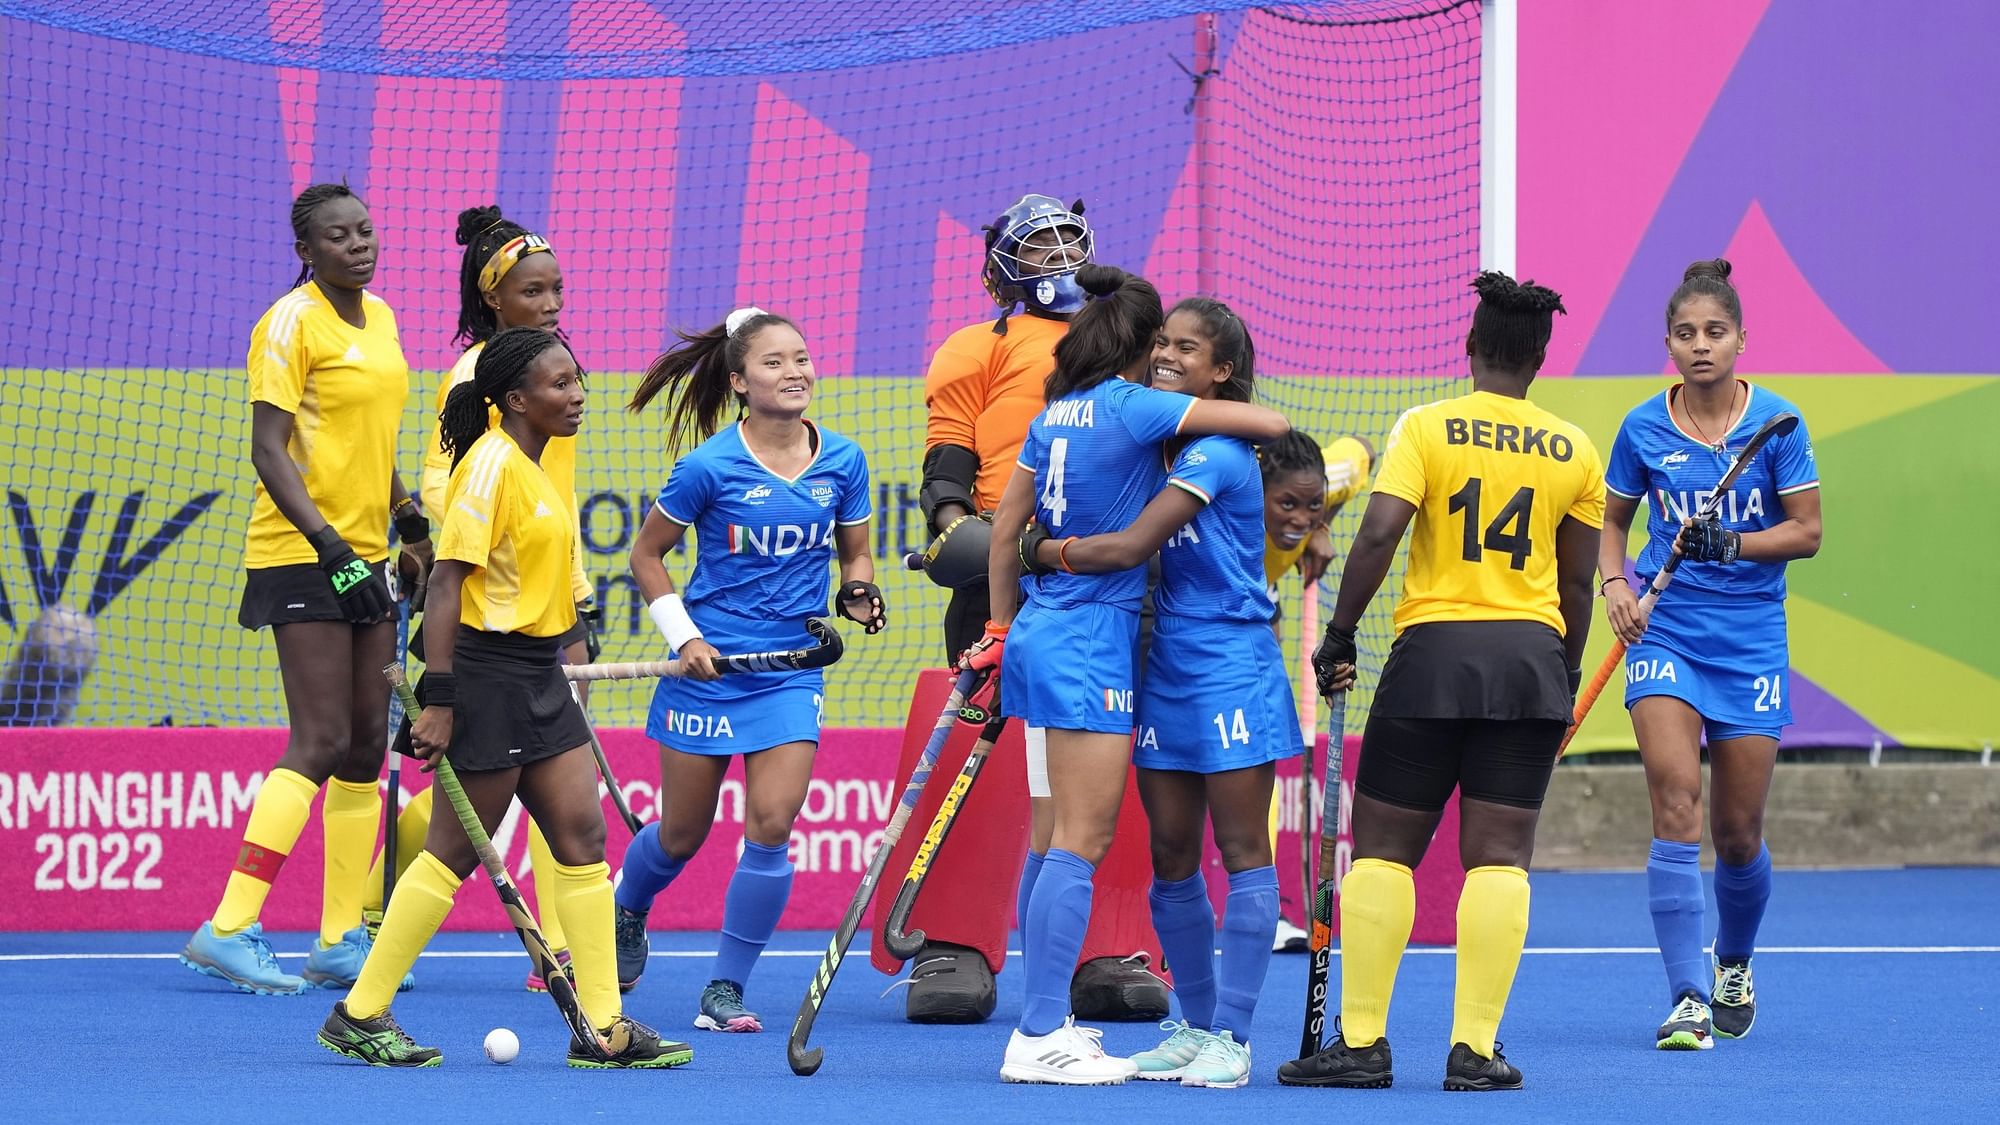 <div class="paragraphs"><p>India team members celebrate after scoring a goal during the Women's Pool A hockey match against Ghana at the Commonwealth Games in Birmingham on Friday.</p></div>